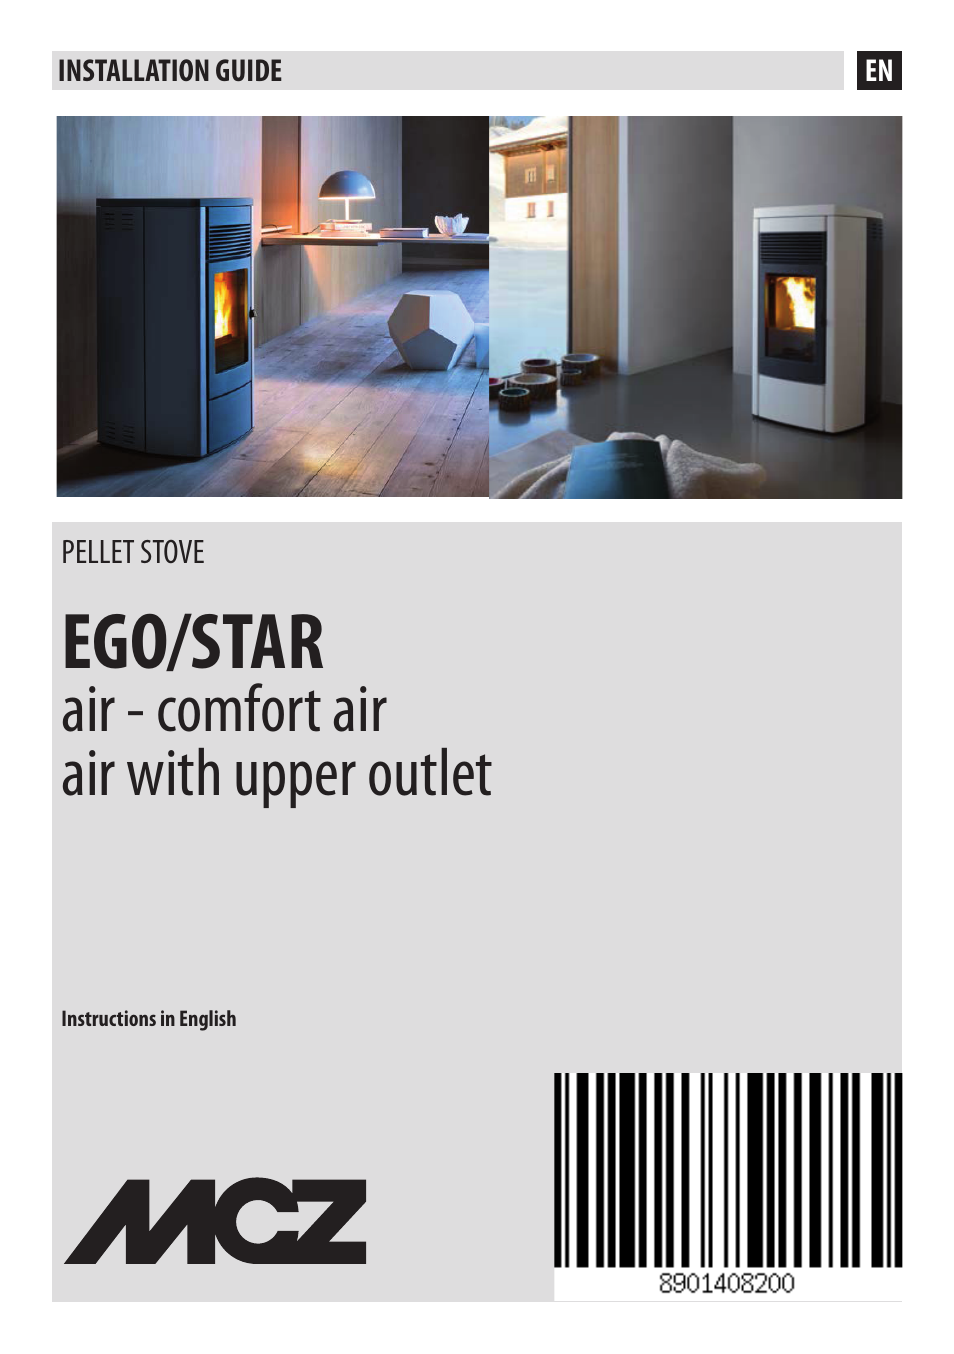 MCZ Ego 2.0 AIR User Manual | 75 pages | Also for: Ego 2.0 AIR - Top smoke  outlet, Ego 2.0 COMFORT AIR, Star 2.0 AIR, Star 2.0 COMFORT AIR, Ego 2.0 AIR  Oyster